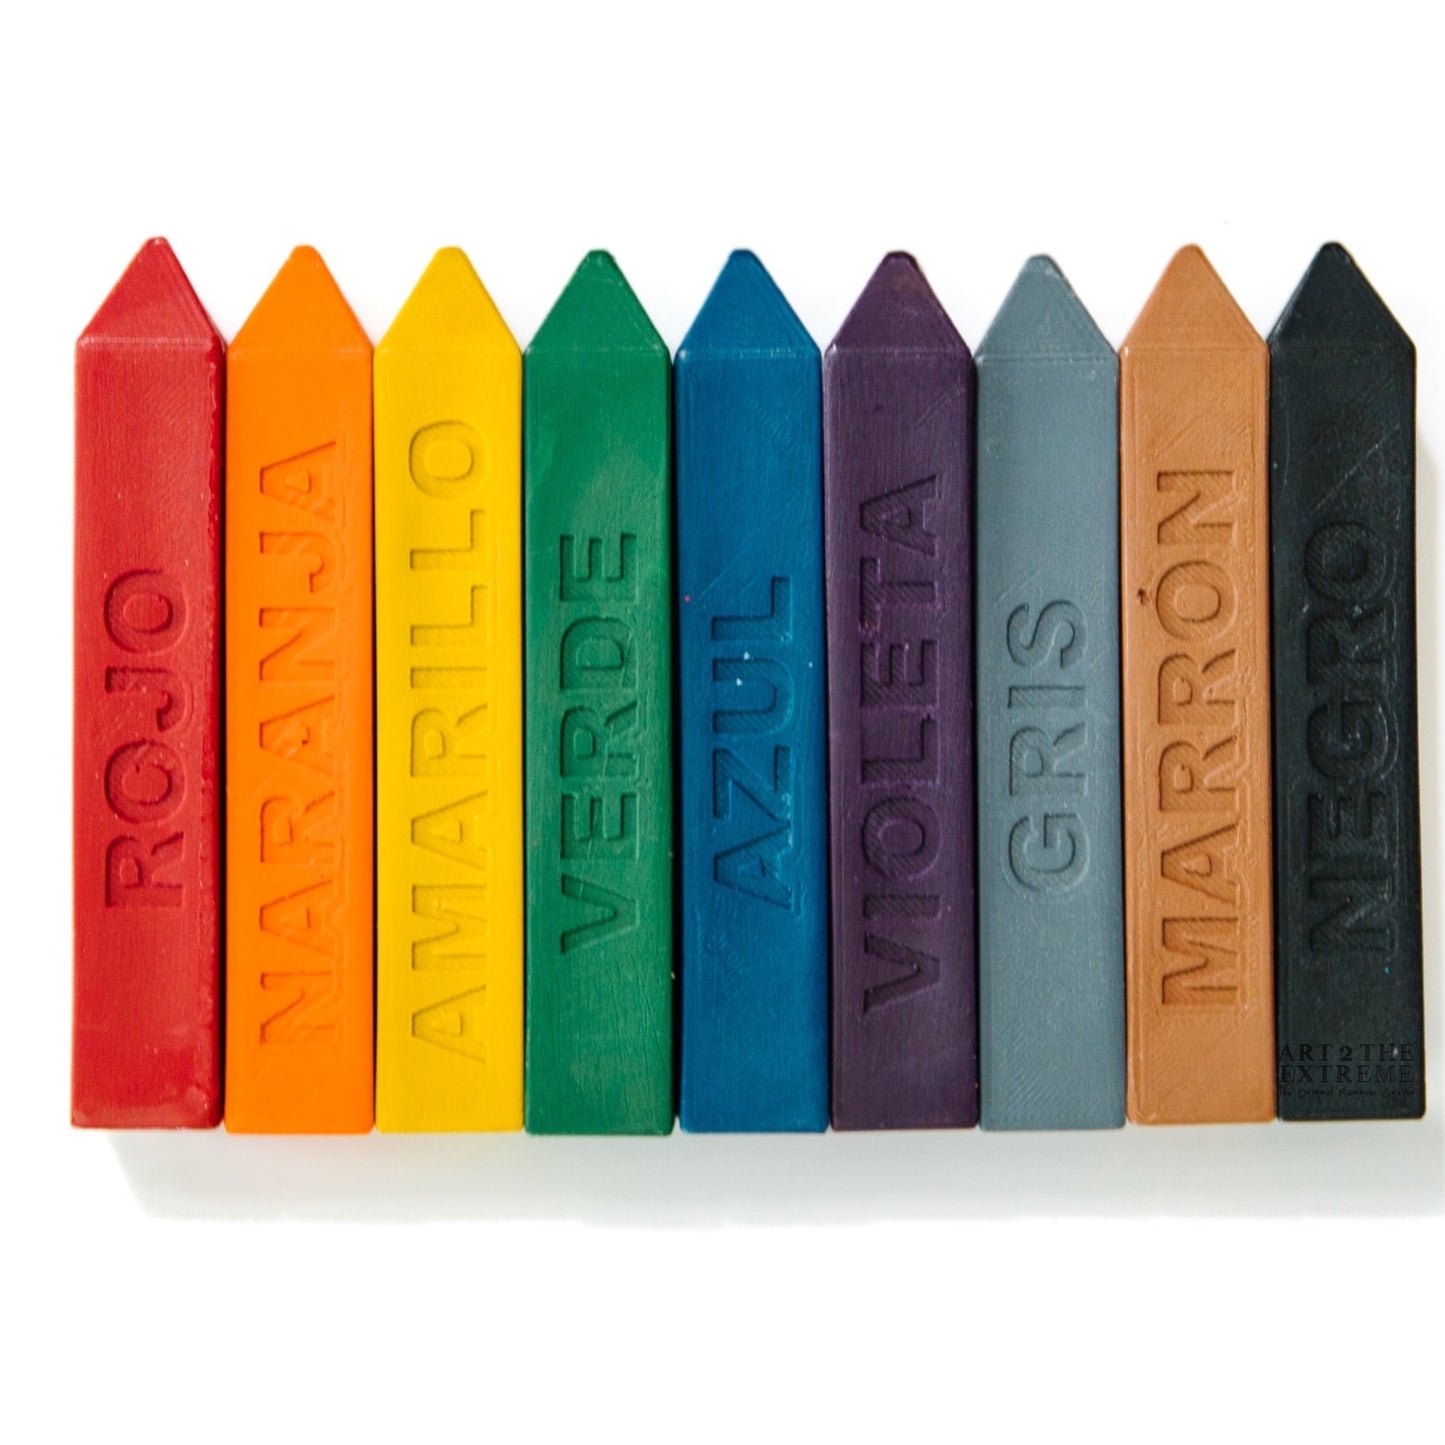 Learn the colors in Spanish! This Original Rainbow Crayon® gift for kids is perfect for the classroom. Each of the 9 oversized, solid-colored crayons has the color name in Spanish. 